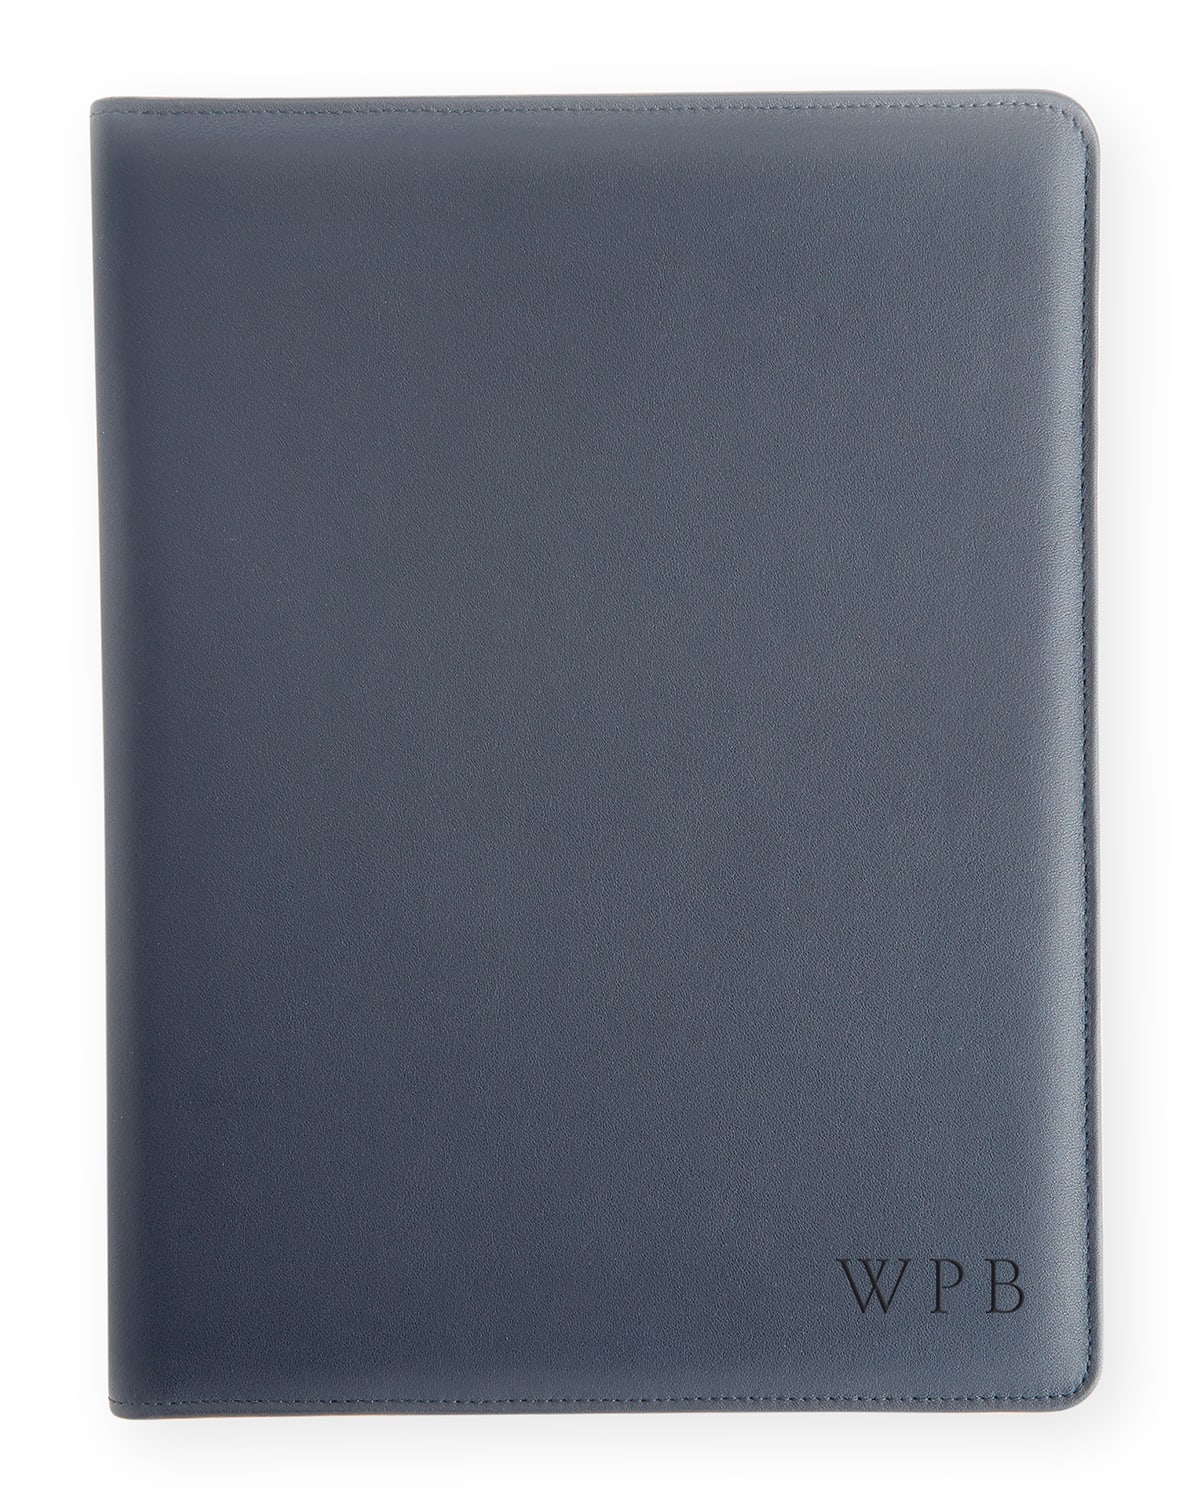 Royce New York Personalized Executive Leather Document Organizer Folder In Navy Blue